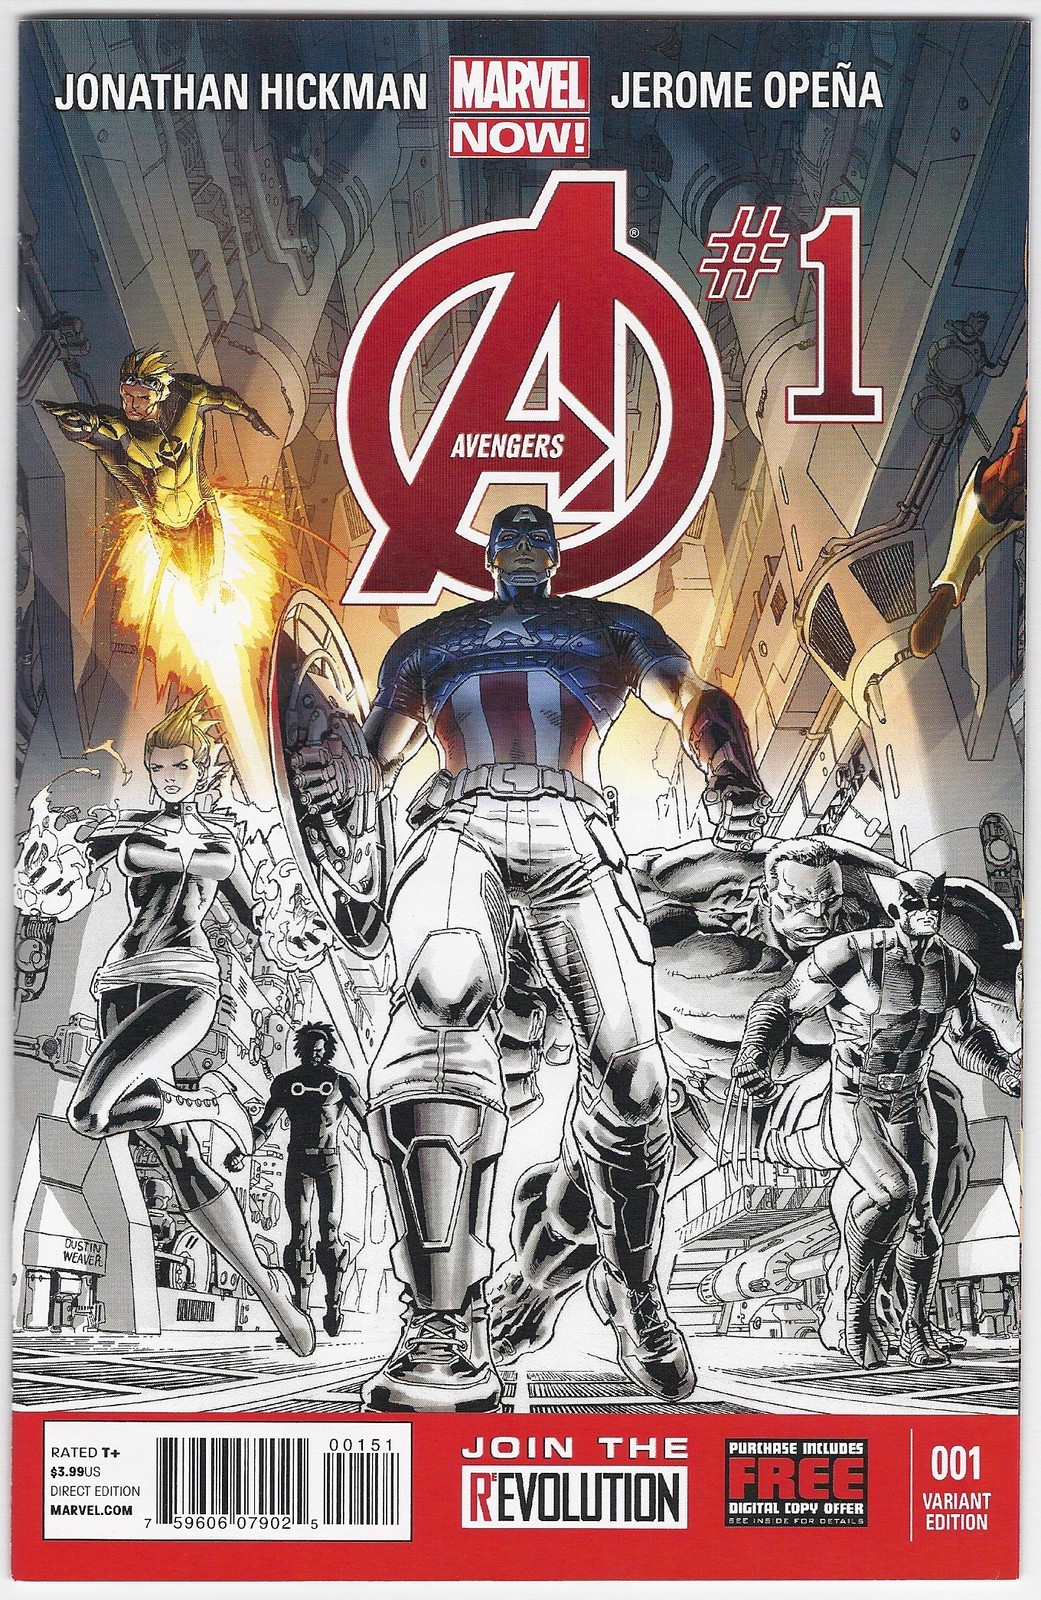 AVENGERS #1 Store Party VARIANT NOW